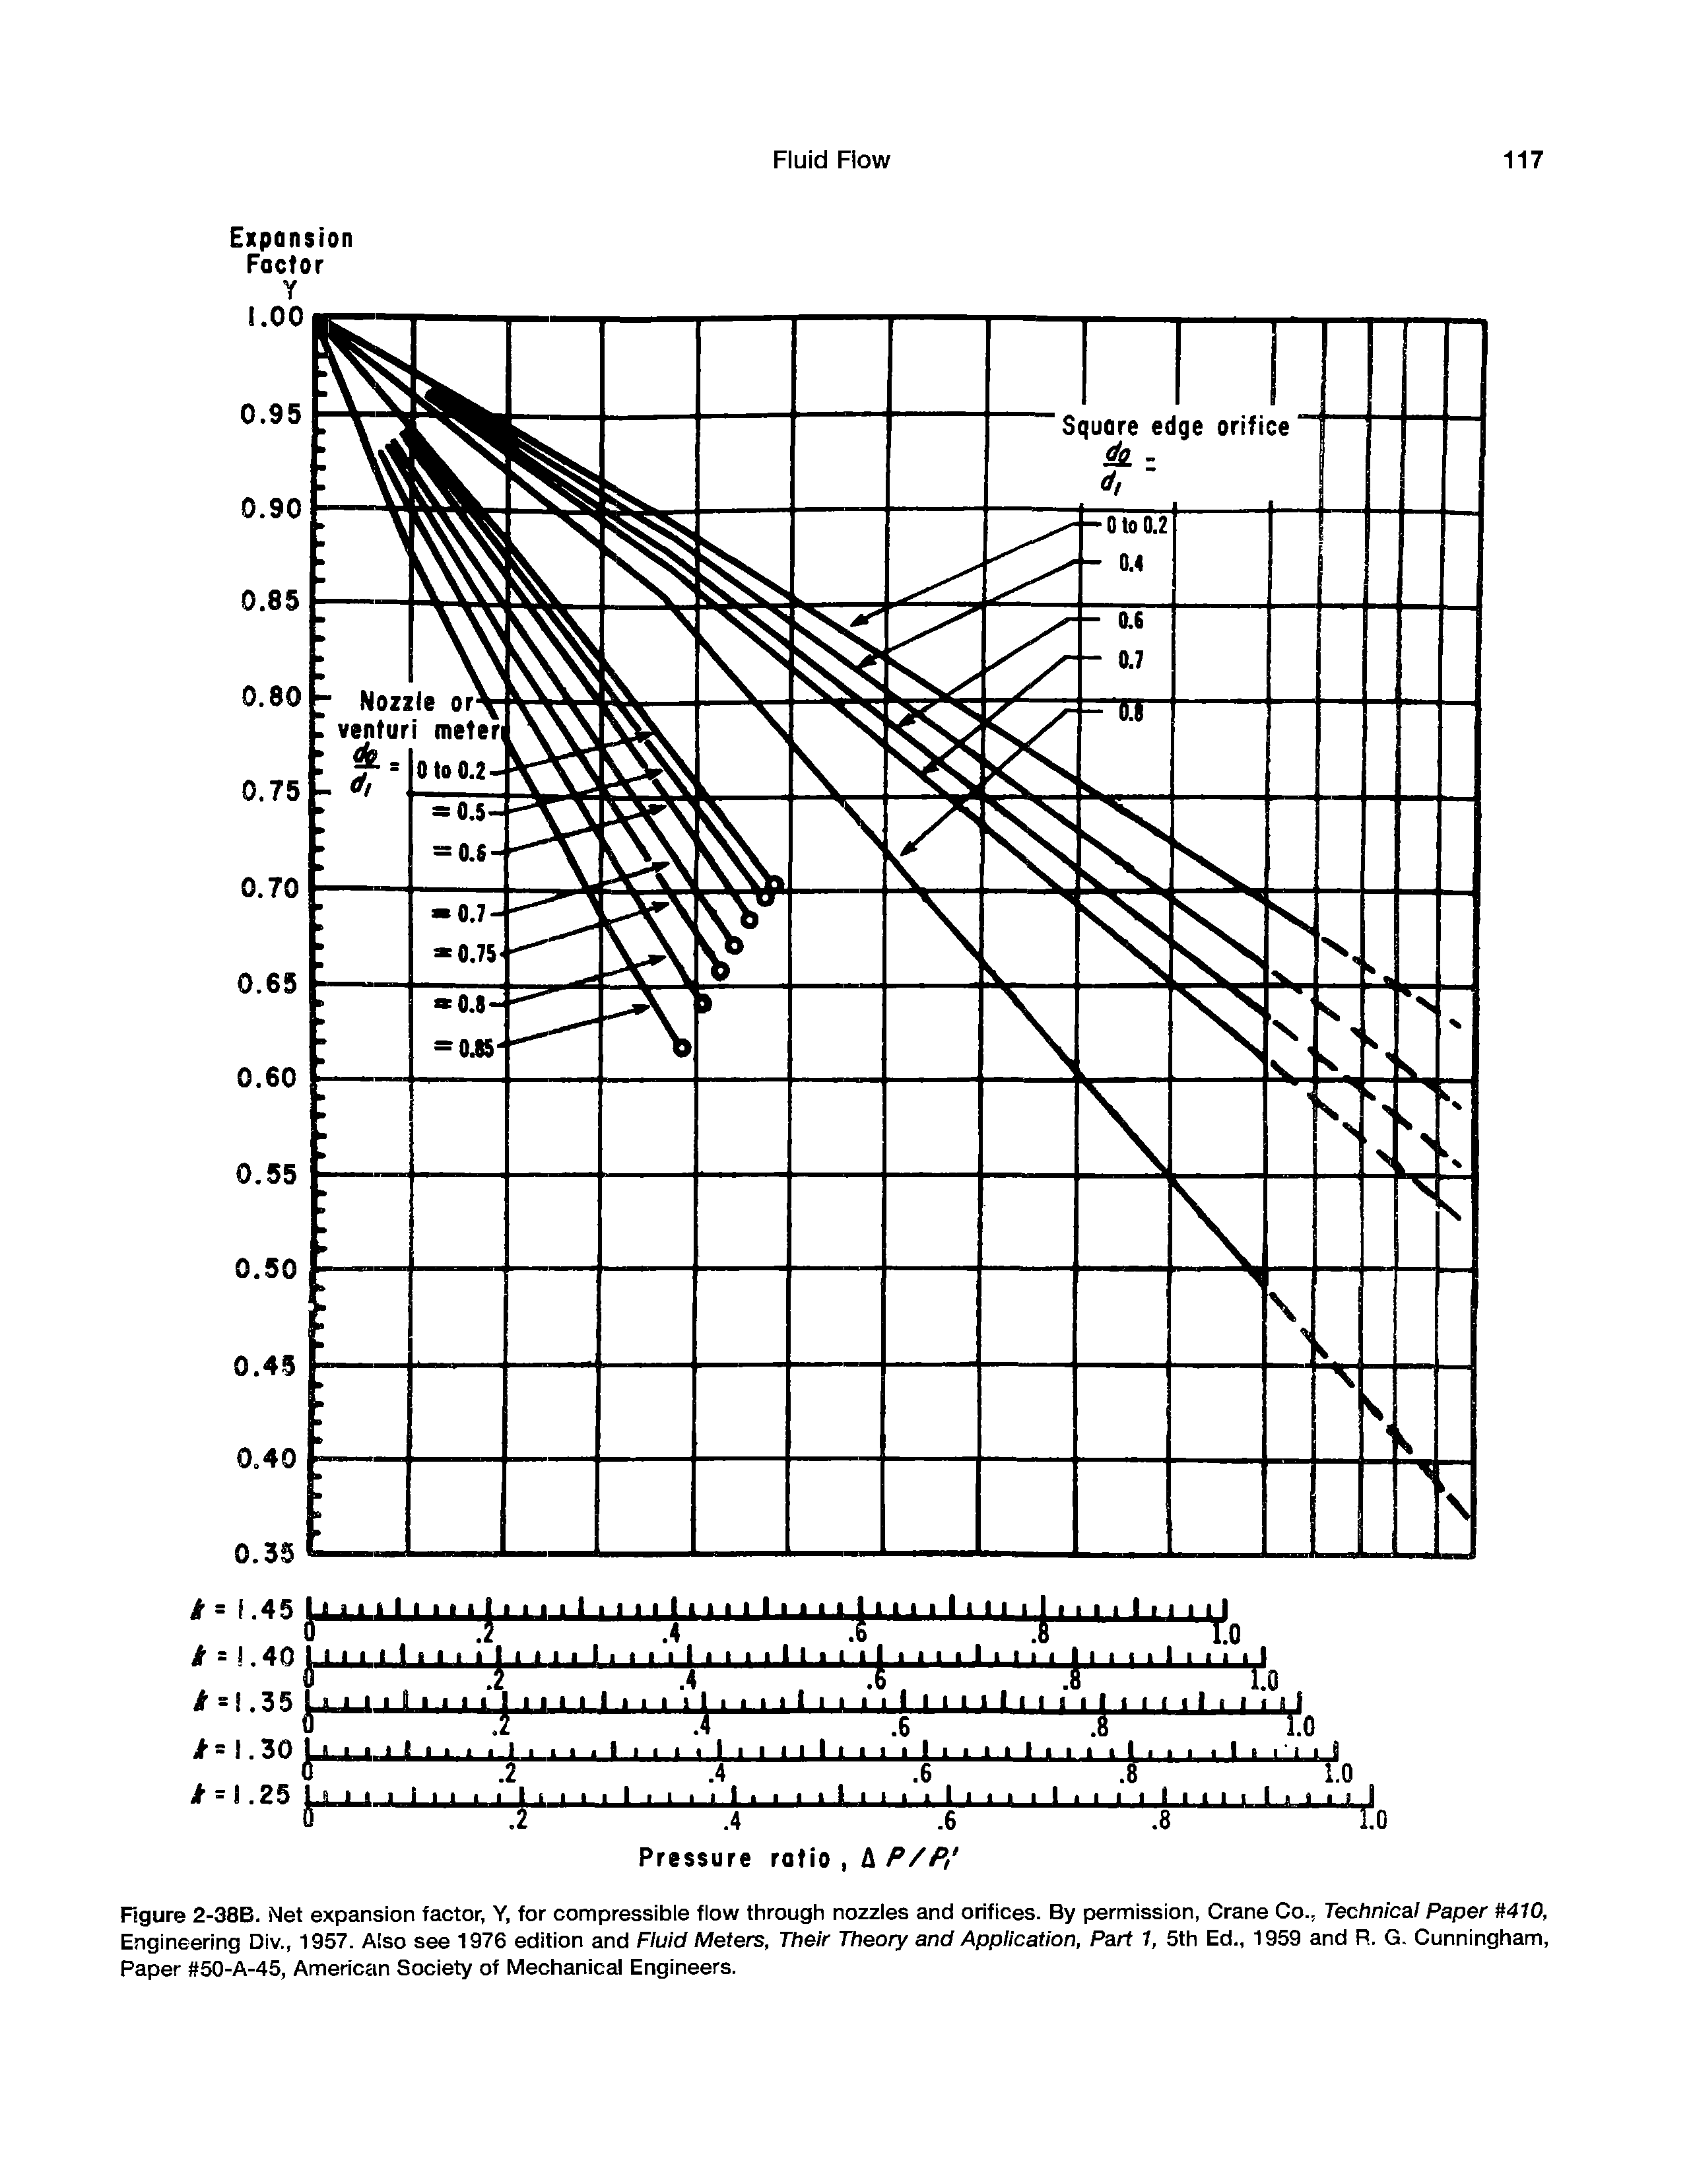 Figure 2-38B. Net expansion factor, Y, for compressible flow through nozzles and orifices. By permission, Crane Co., Technical Paper 410, Engineering Div., 1957. Also see 1976 edition and Fluid Meters, Their Theory and Application, Part 1, 5th Ed., 1959 and R. G. Cunningham, Paper 50-A-45, American Society of Mechanical Engineers.